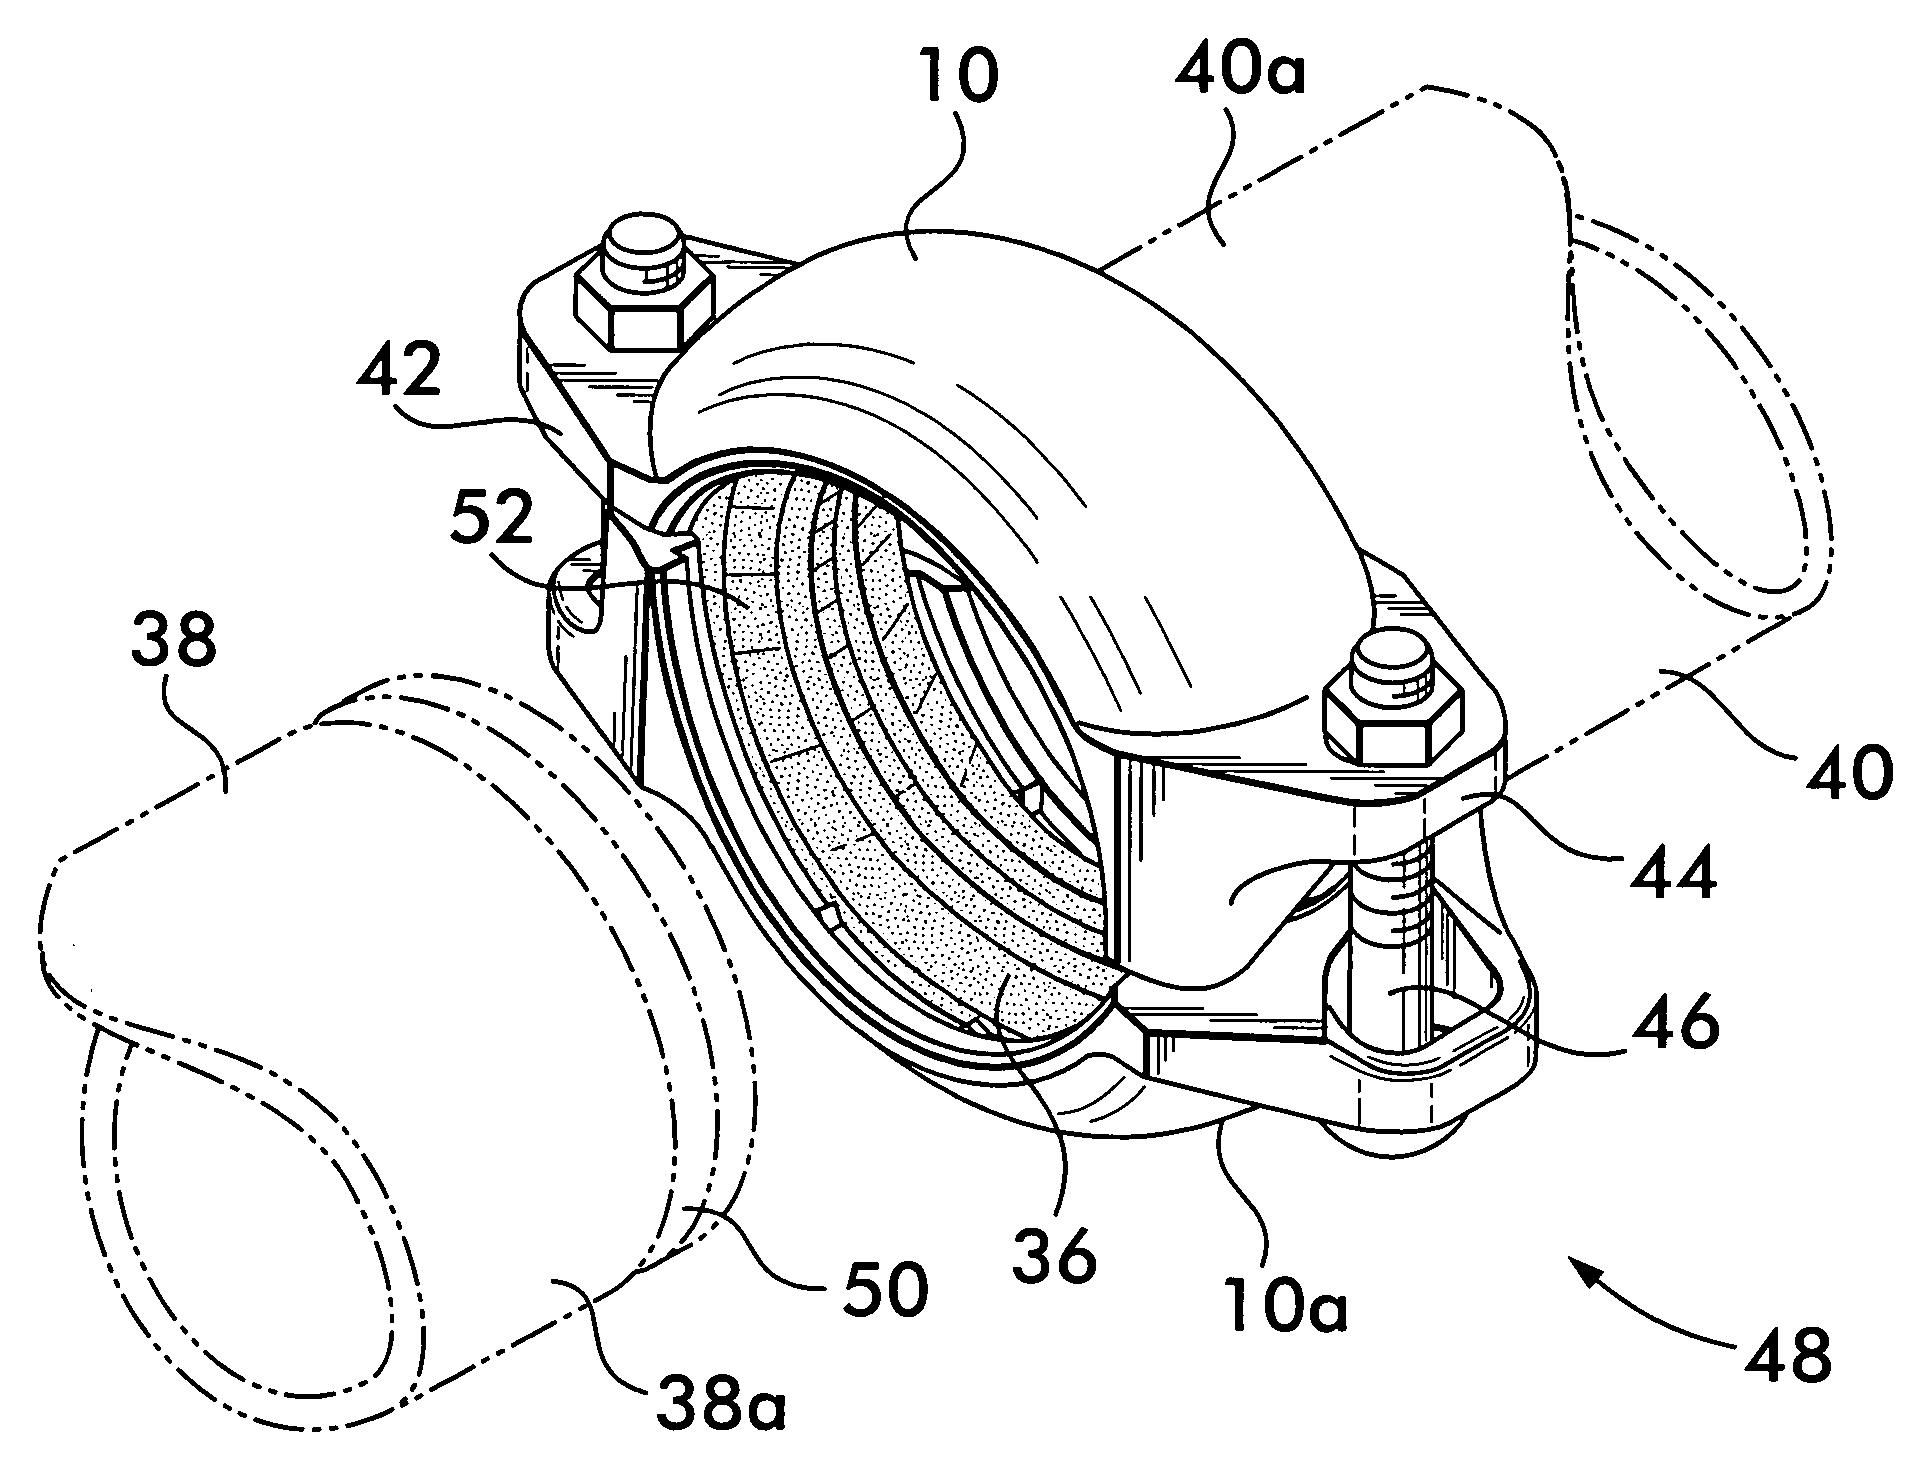 Deformable pipe coupling having multiple radii of curvature